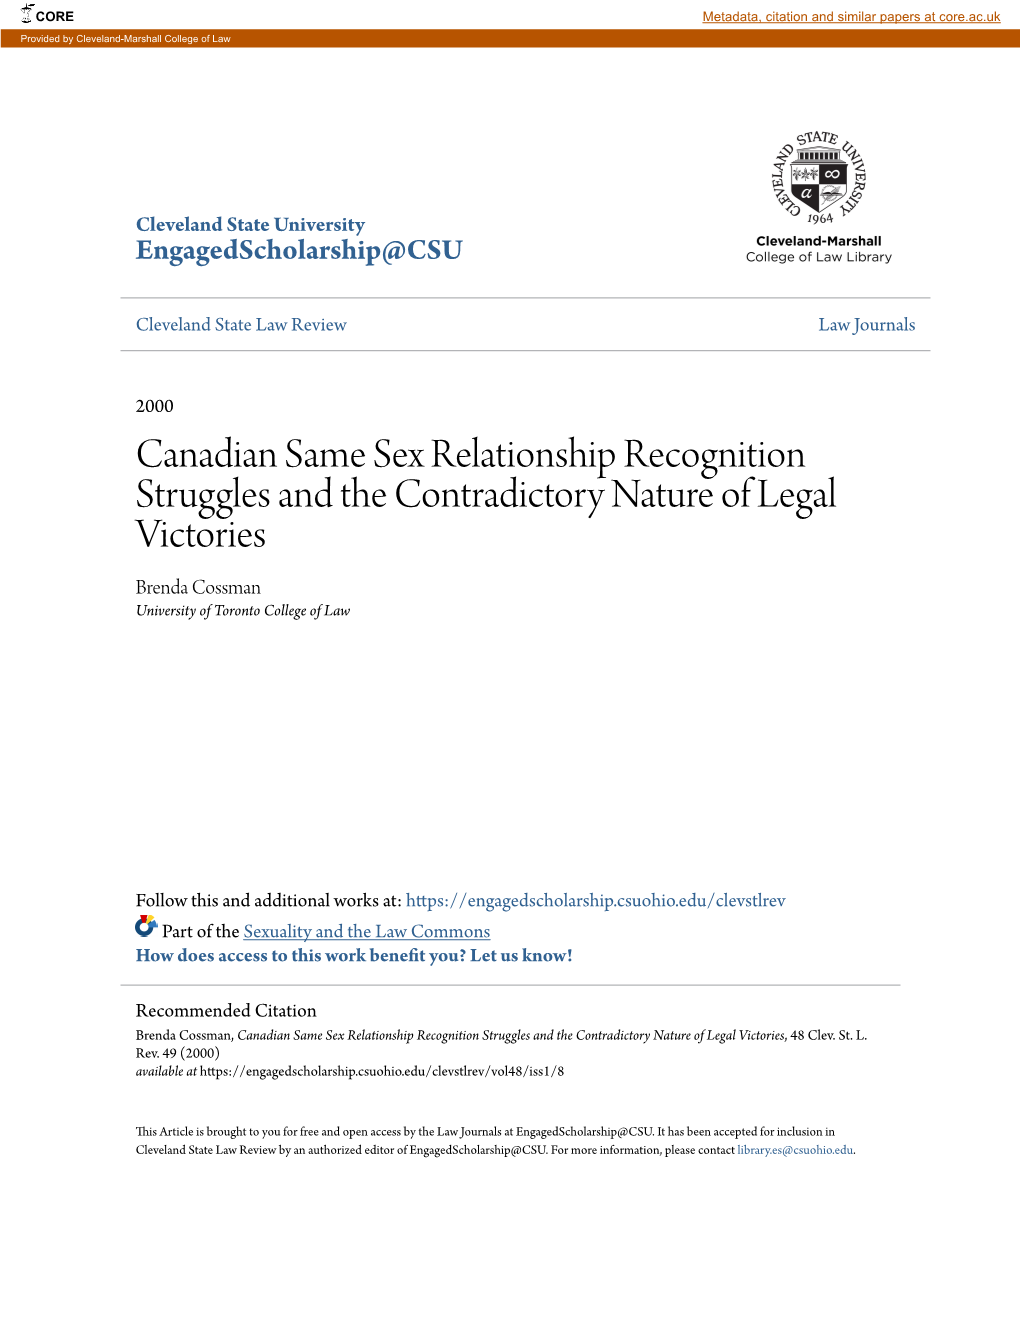 Canadian Same Sex Relationship Recognition Struggles and the Contradictory Nature of Legal Victories Brenda Cossman University of Toronto College of Law